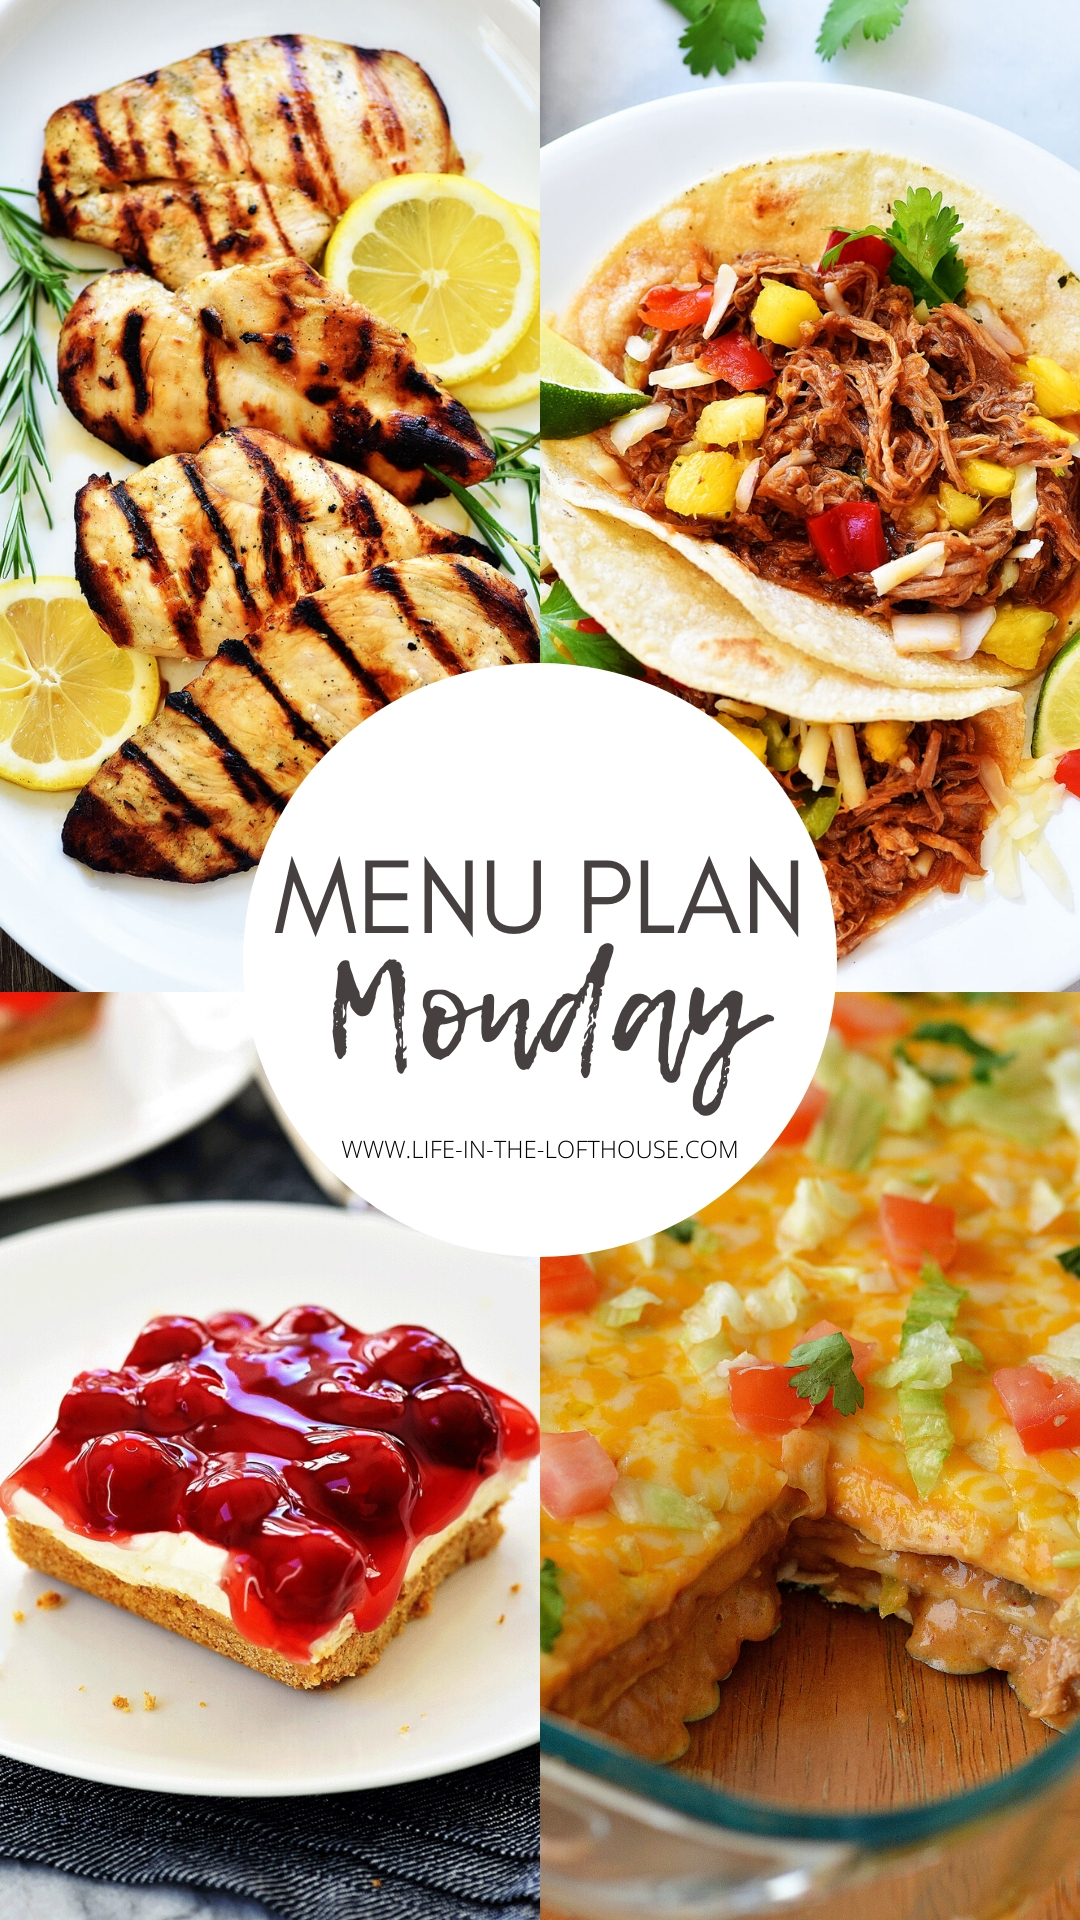 Menu Plan Monday is a list of dinner recipes. Each menu includes six dinner ideas and one dessert. Life-in-the-Lofthouse.com